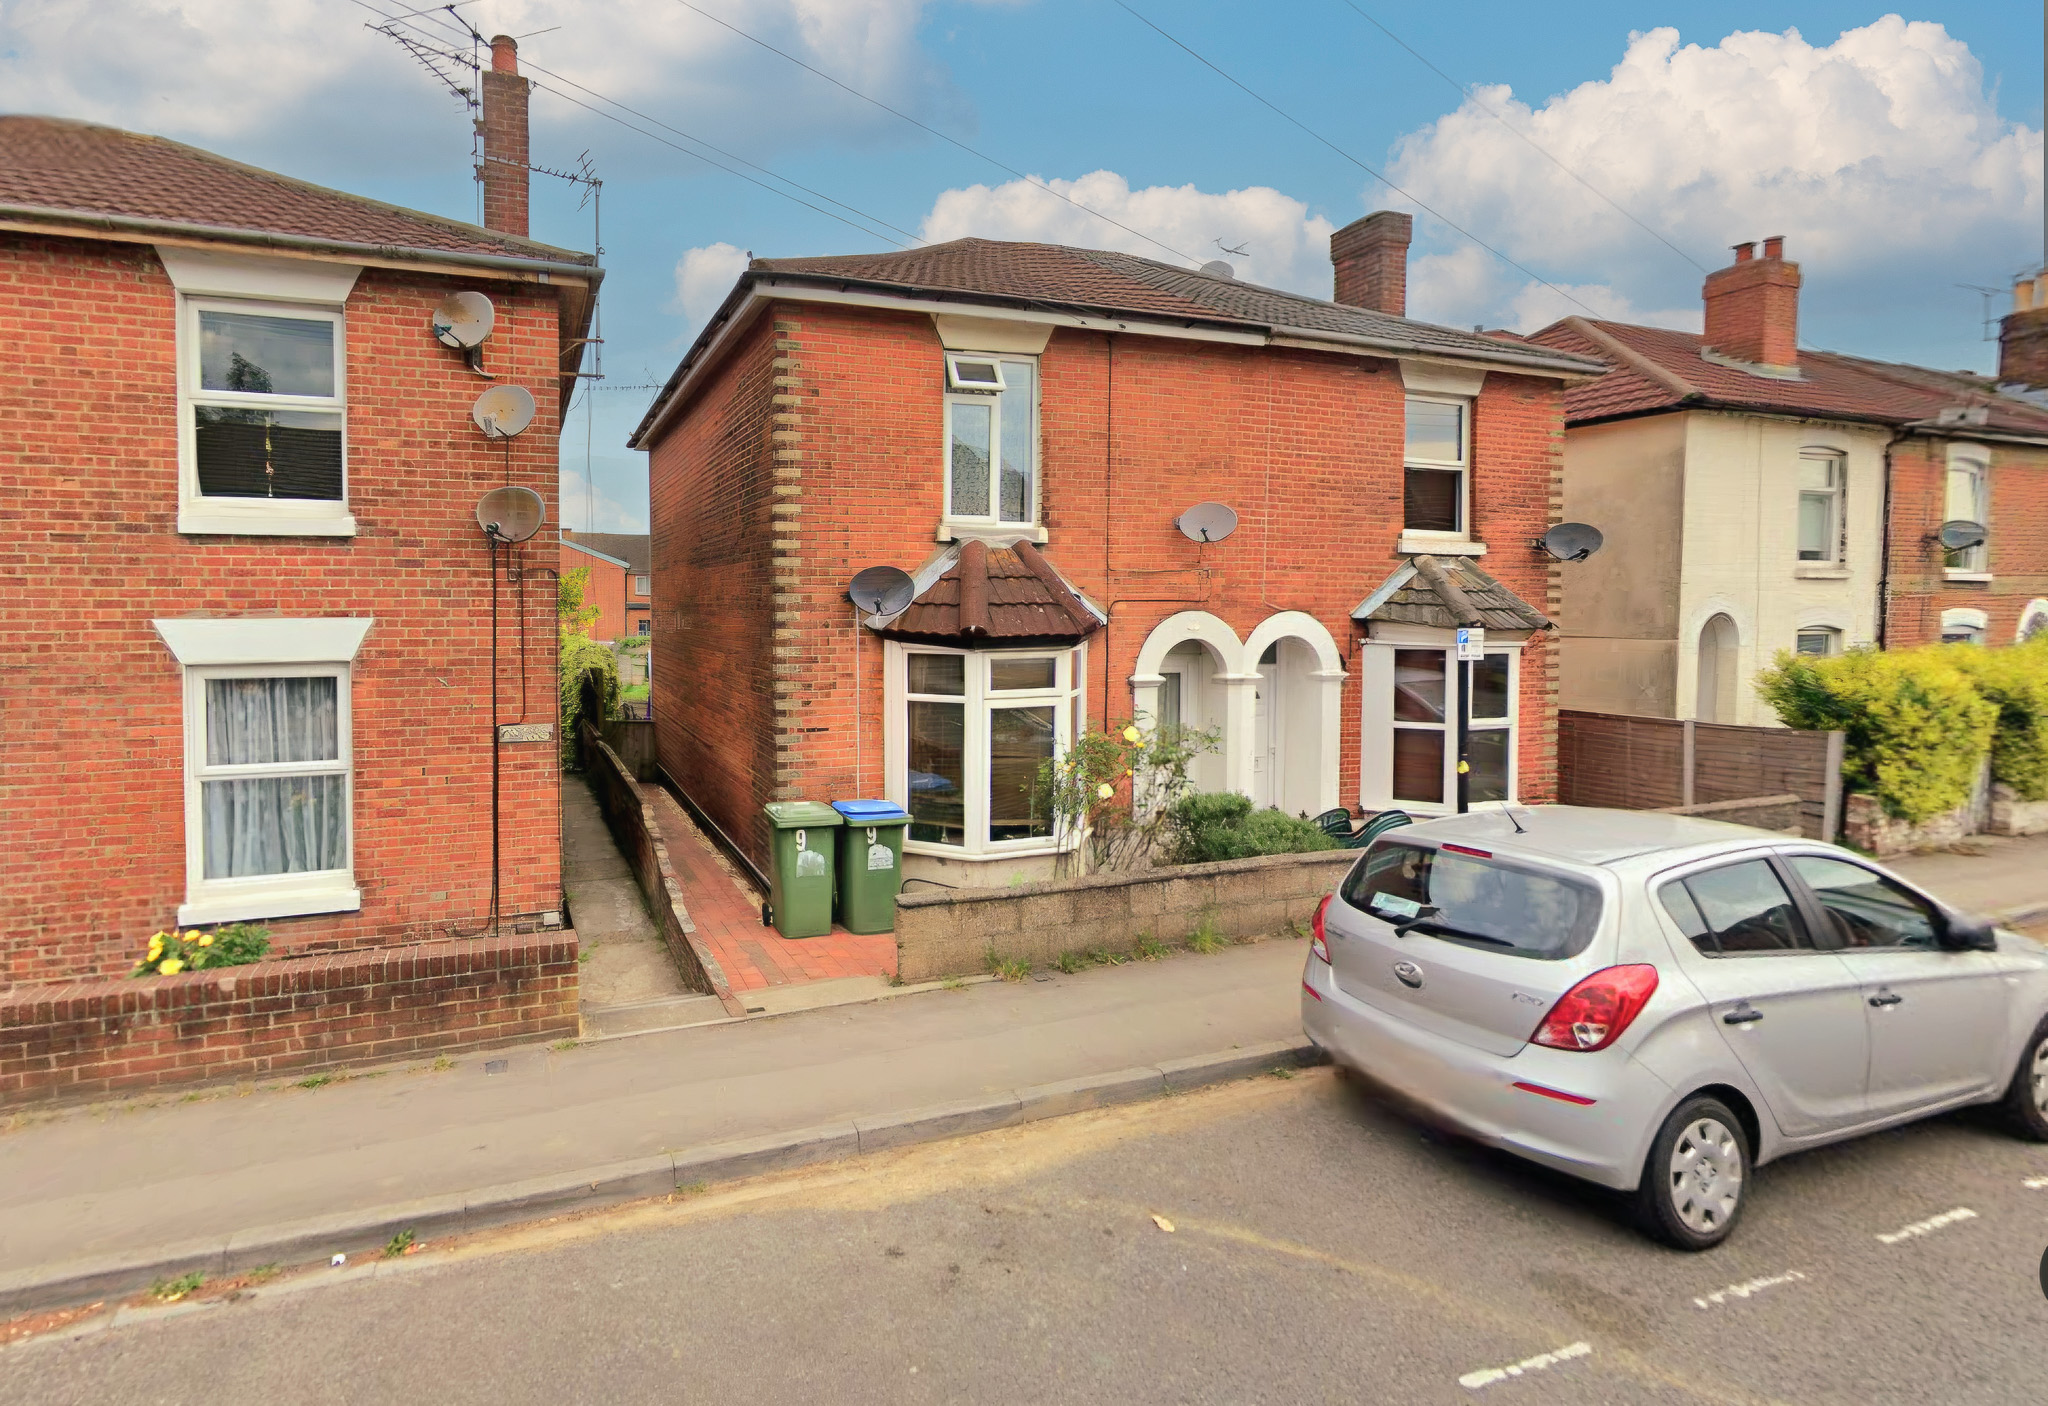 1 bed Ground Floor Flat for rent in Southampton. From Field Palmer Property Managment